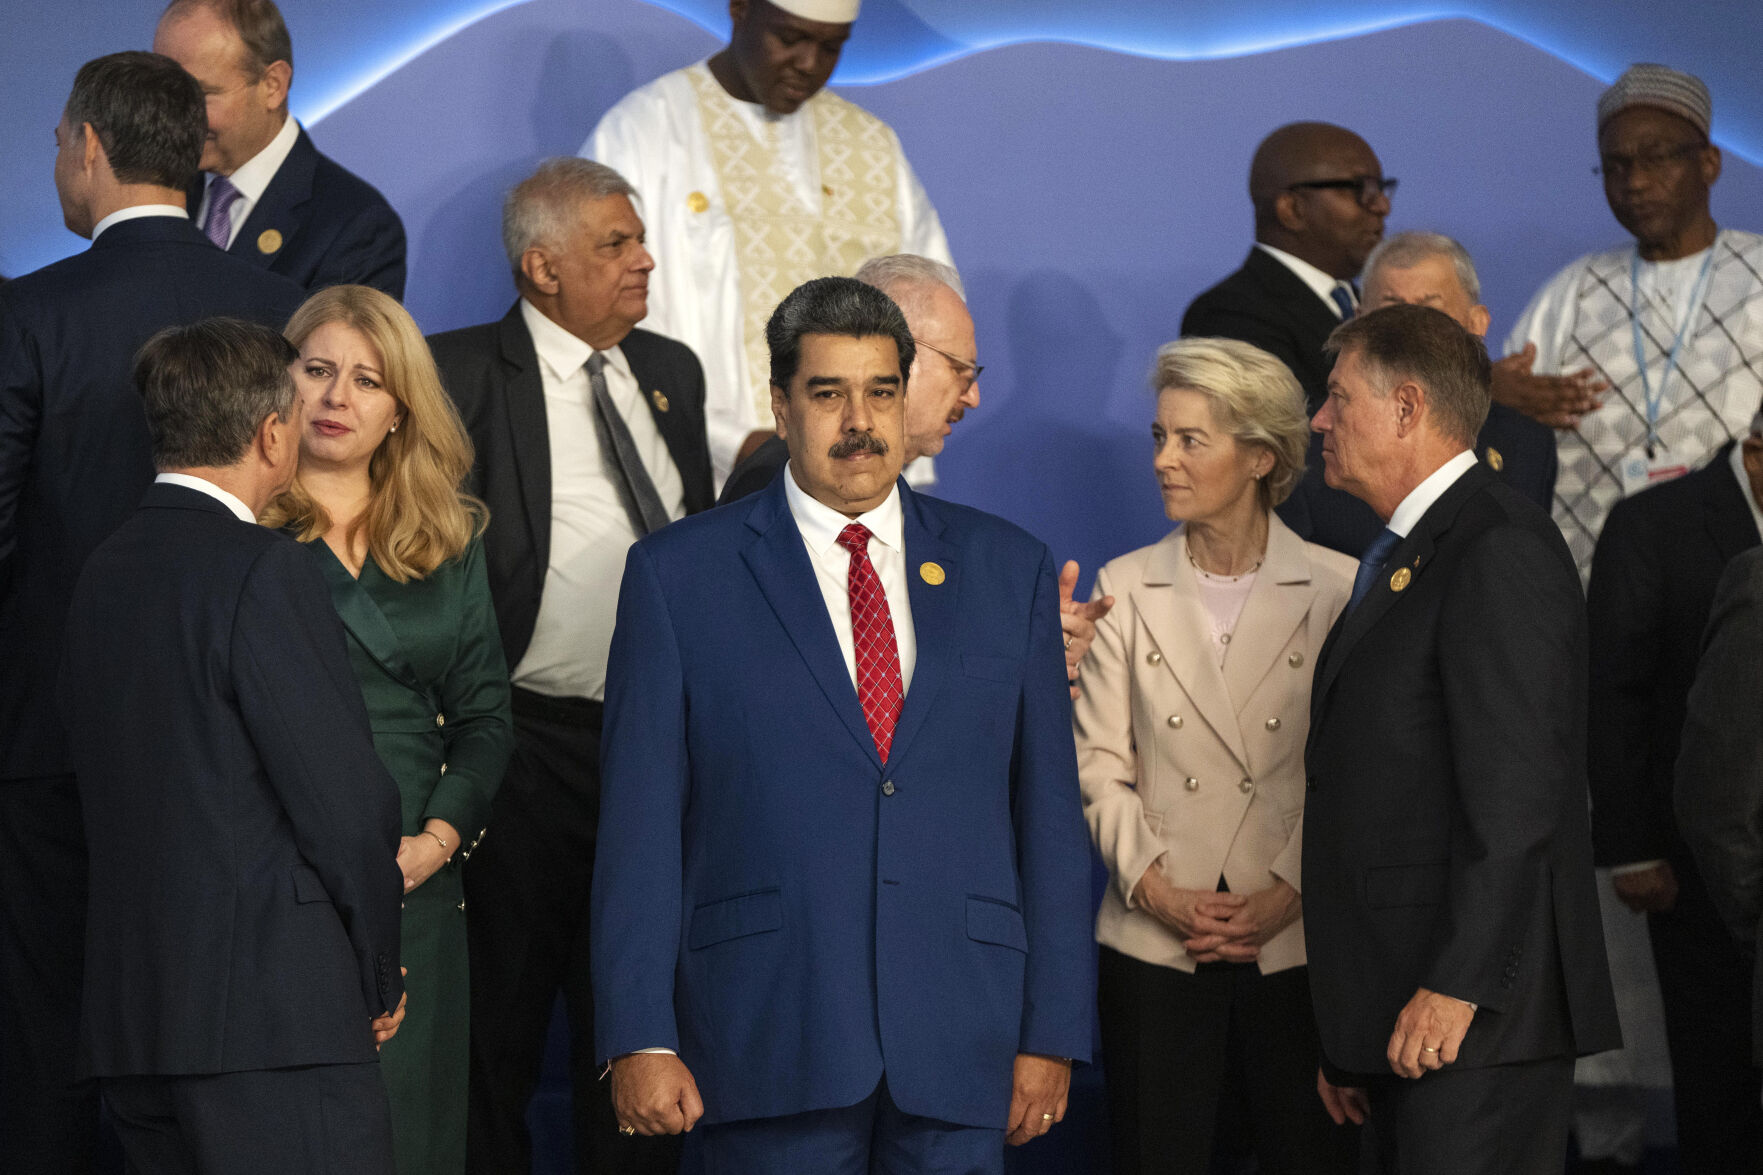 <p>The President of Venezuela, Nicolás Maduro Moros, center, stands next to the President of the European Commission Ursula von der Leyen, center center right, as leaders prepare themselves for a group photo at the COP27 U.N. Climate Summit, in Sharm el-Sheikh, Egypt, Monday, Nov. 7, 2022. (AP Photo/Nariman El-Mofty)</p>   PHOTO CREDIT: Nariman El-Mofty - staff, AP